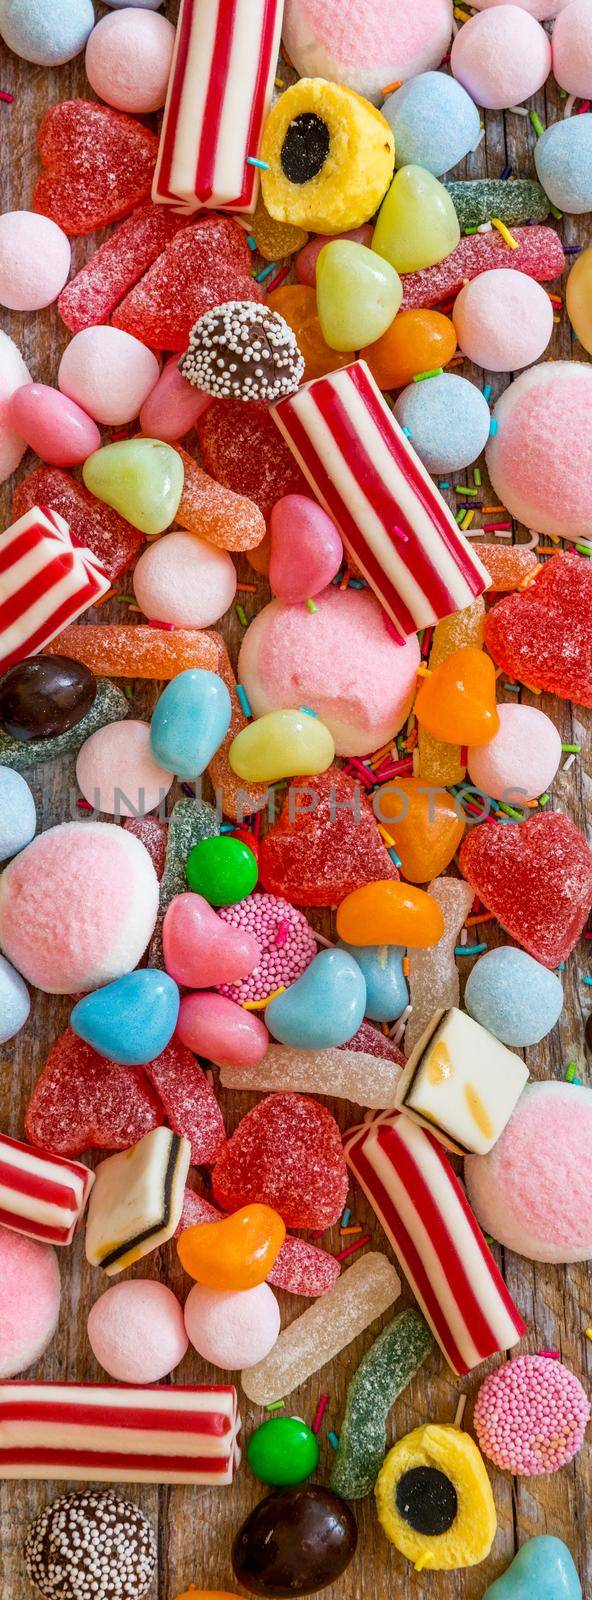 variety of candies on a wooden background by tan4ikk1